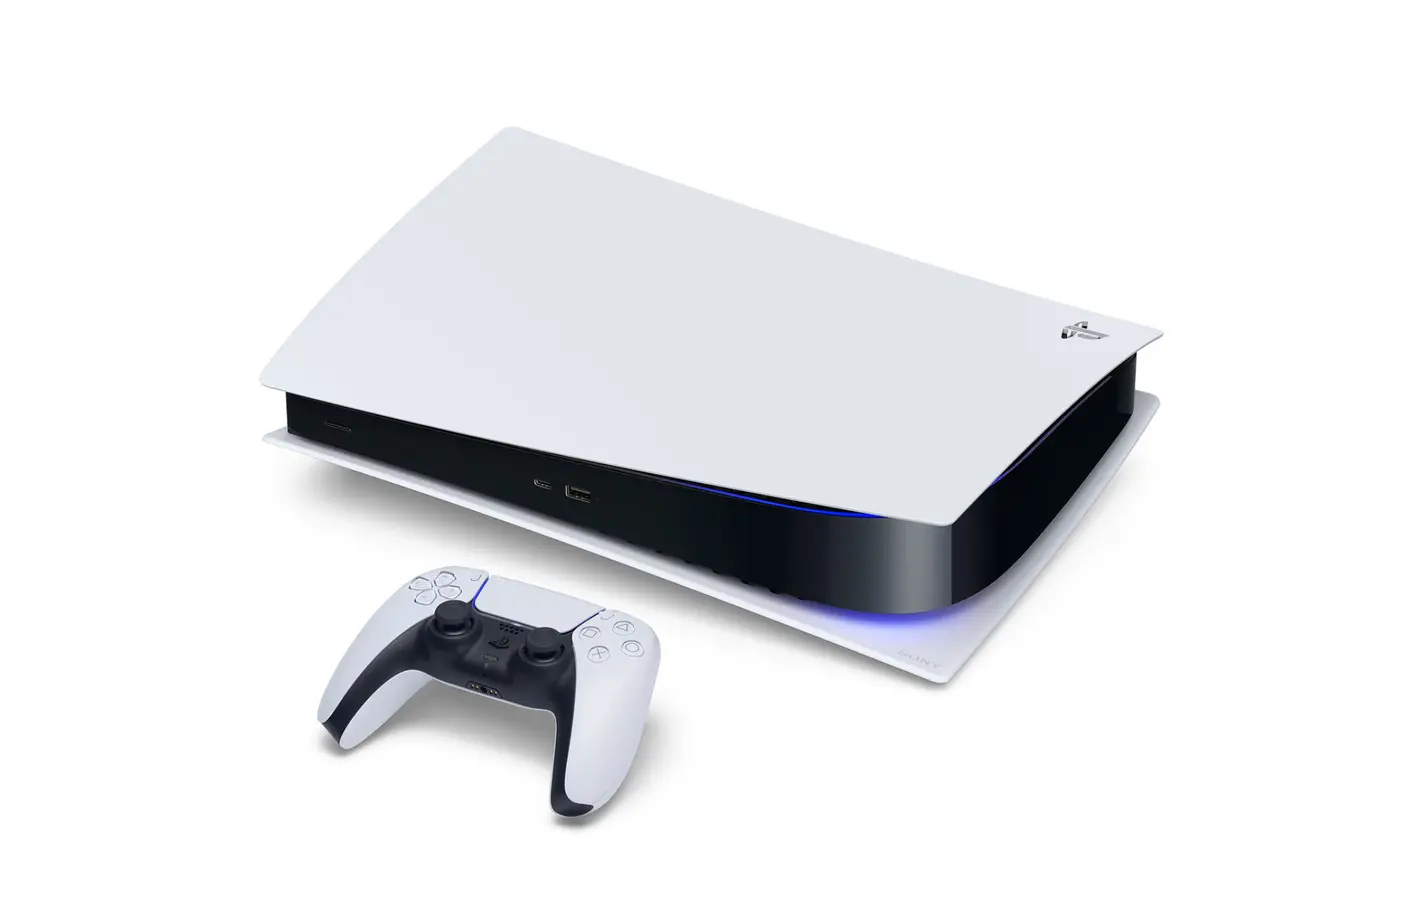 PS5 change location - An image of a white PS5 and console